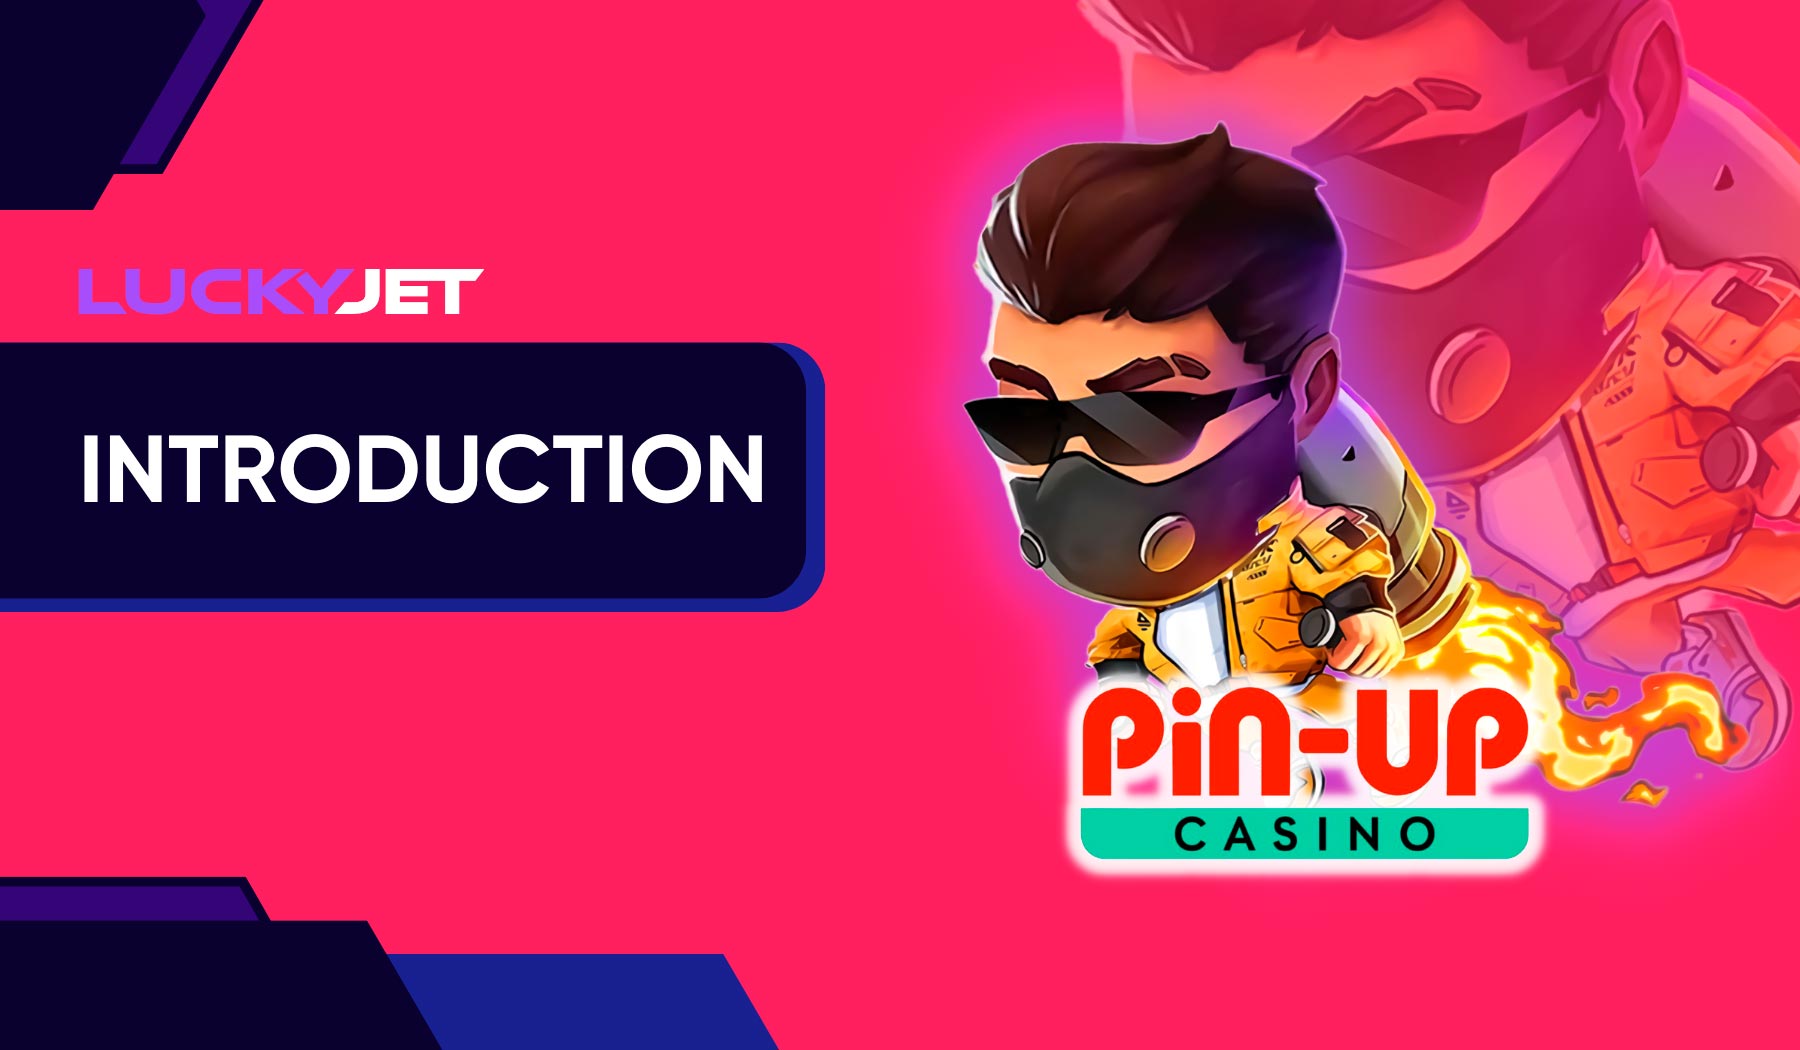 Pin-Up, a leading online casino, unveils Lucky Jet